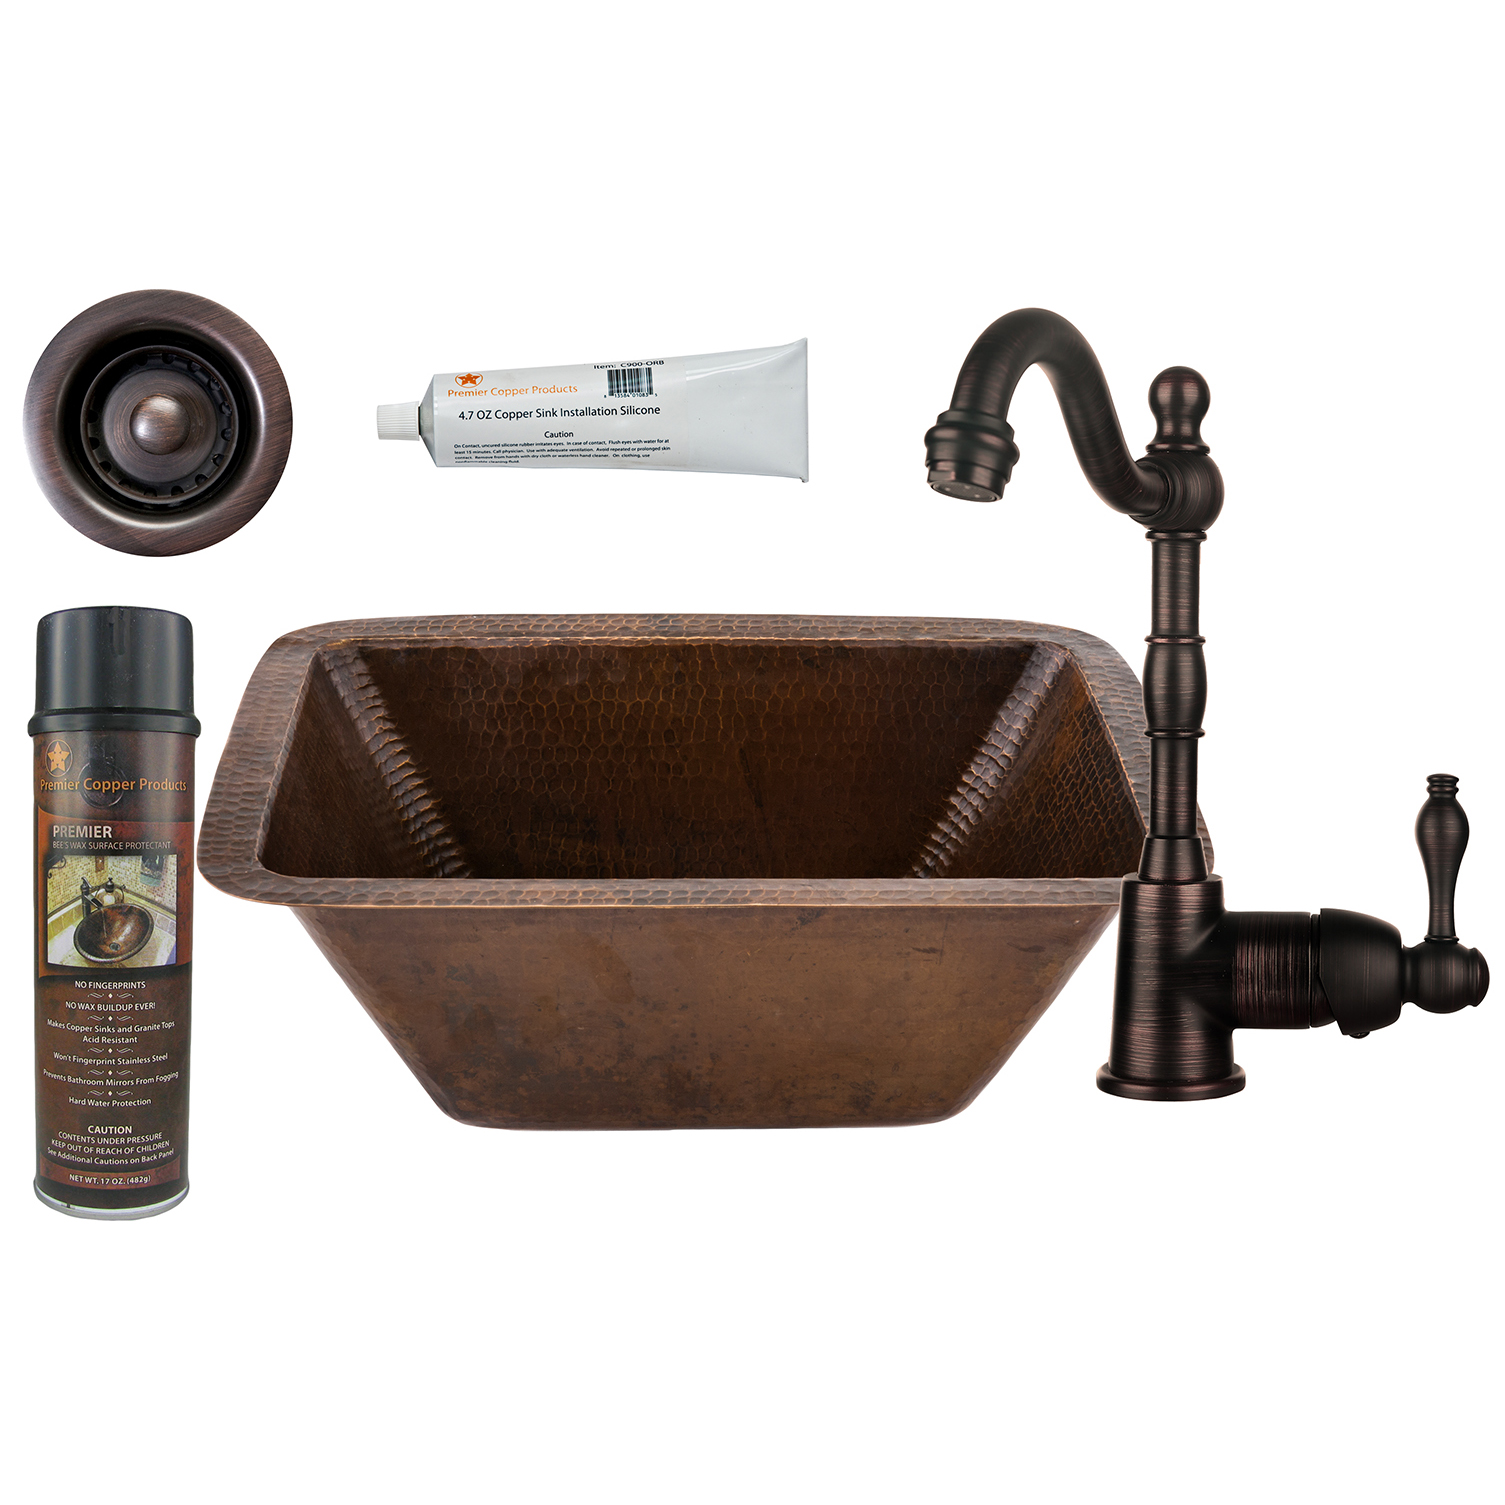 Rectangle Copper Bar Sink With 2 Inch Drain Size, Faucet And Accessories Package, Oil Rubbed Bronze